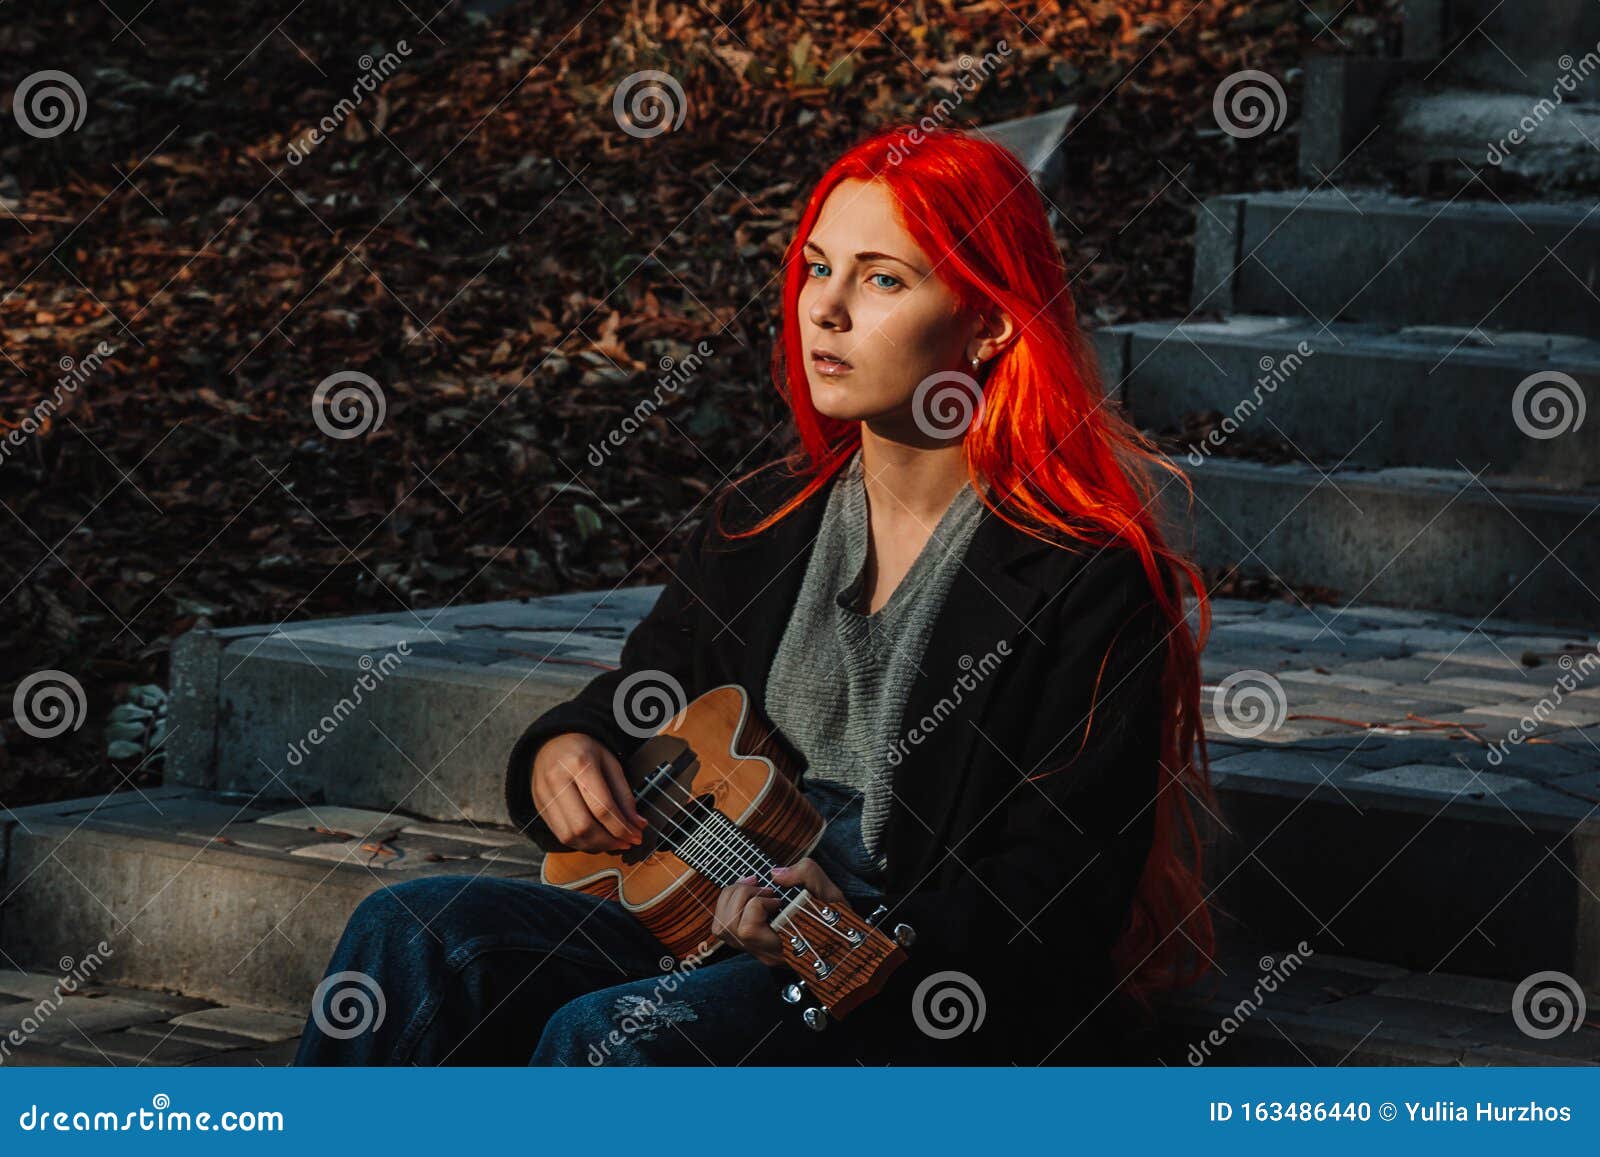 Redhead Girl With Long Hair Plays The Ukulele Perfect